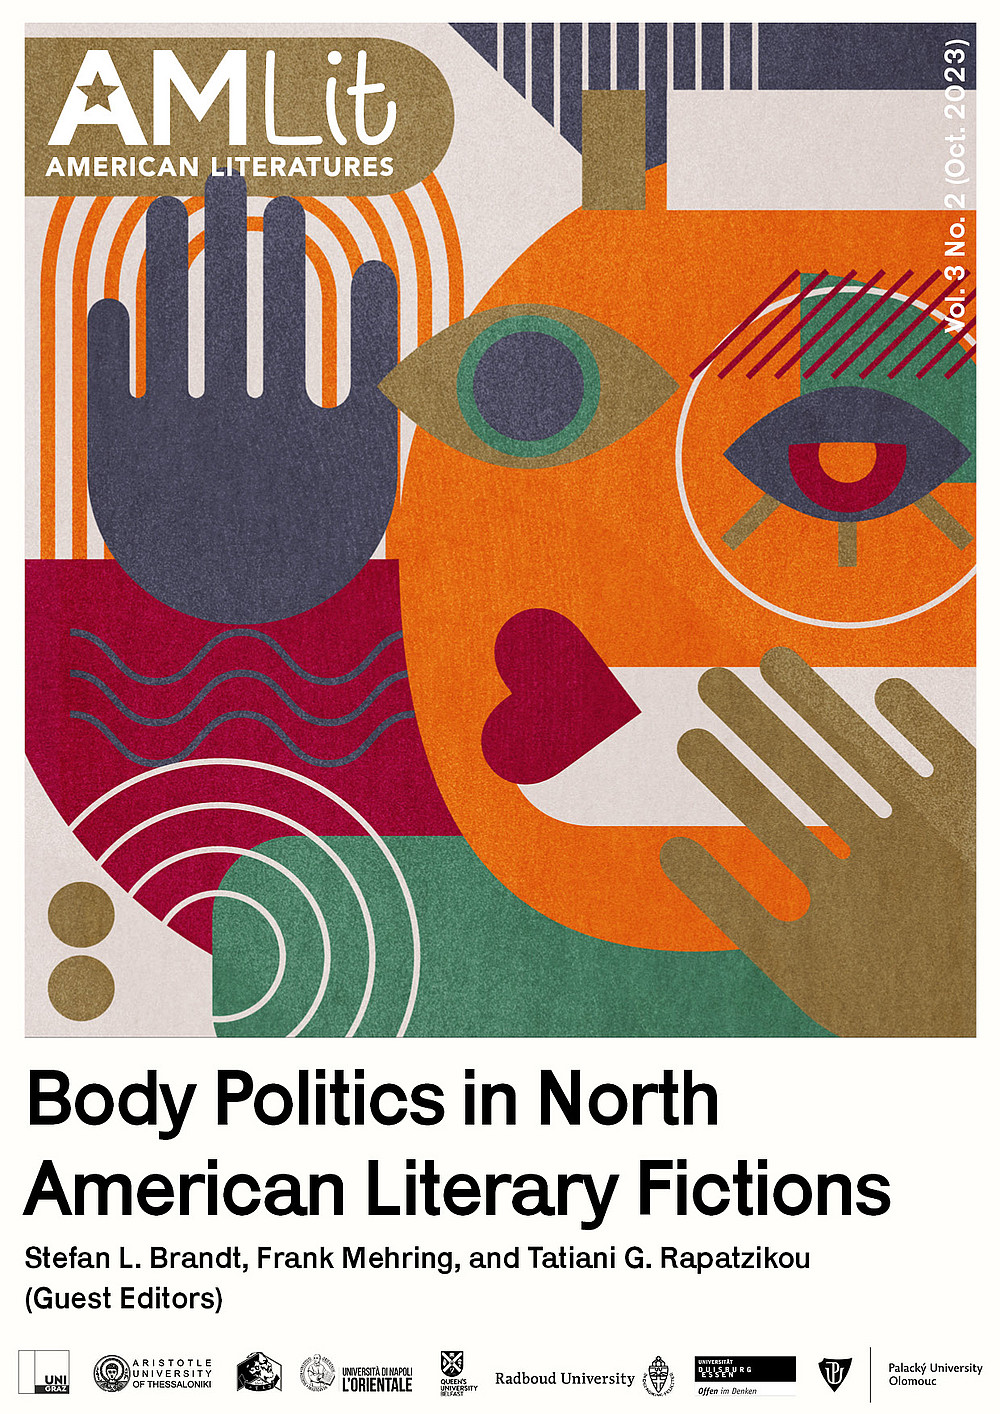 This special issue of AmLit, titled Body Politics in North American Literary Fictions, offers a comprehensive exploration of the intricate relationship between the human body and politics in a diverse range of North American literary works. ©AmLit